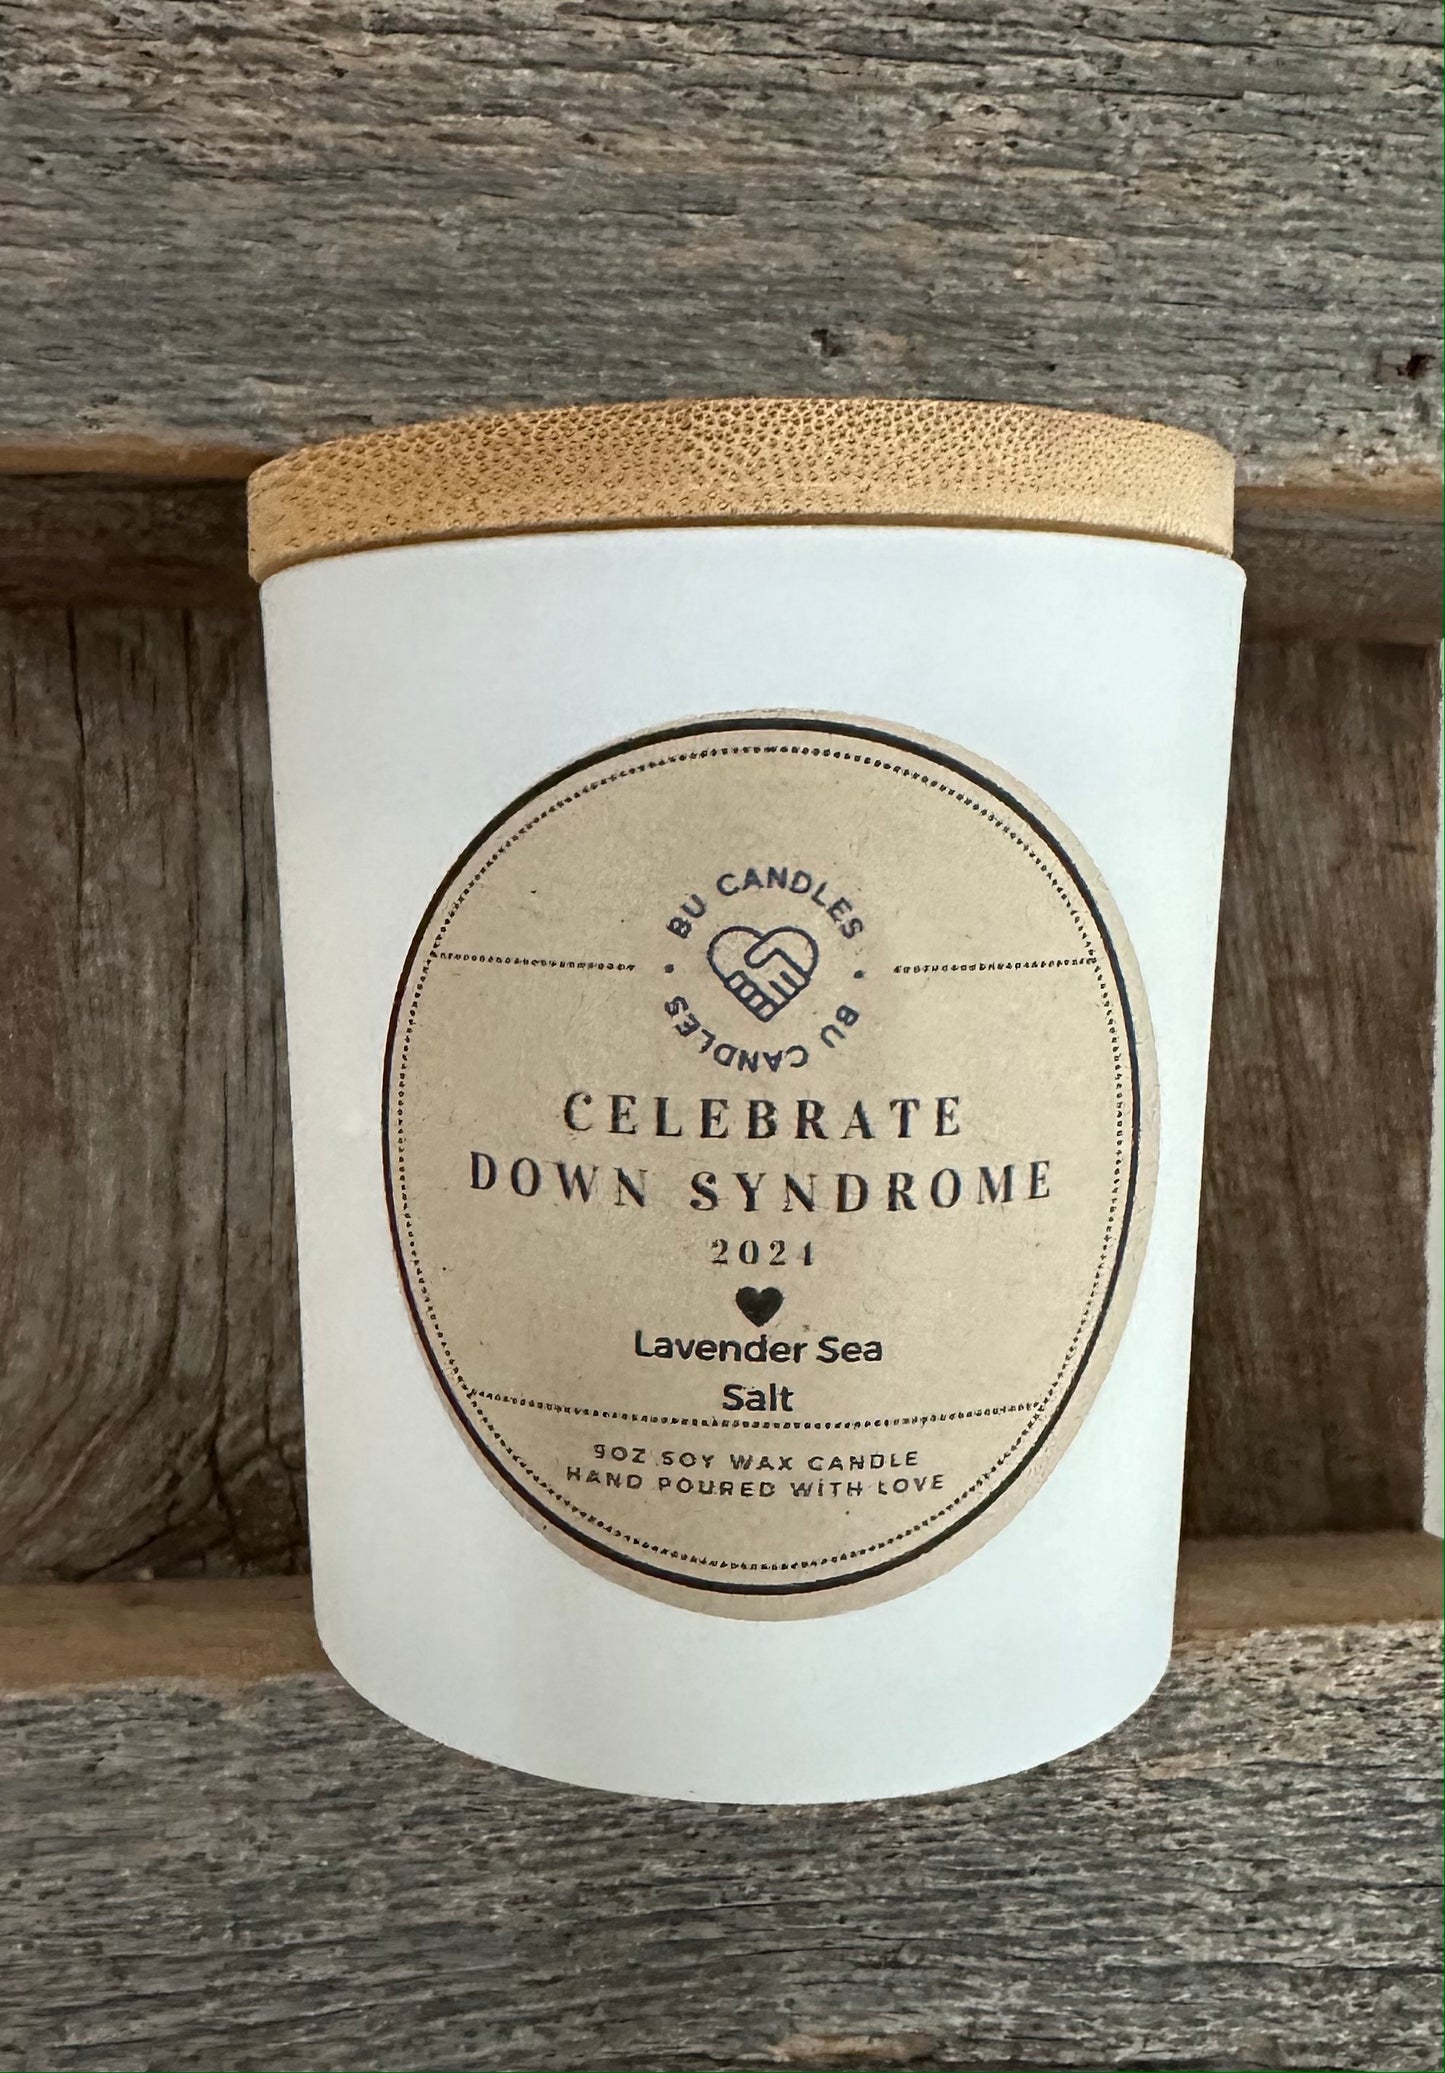 Celebrate Down Syndrome - White Matte jar with a bamboo lid - Lavender Sea Salt